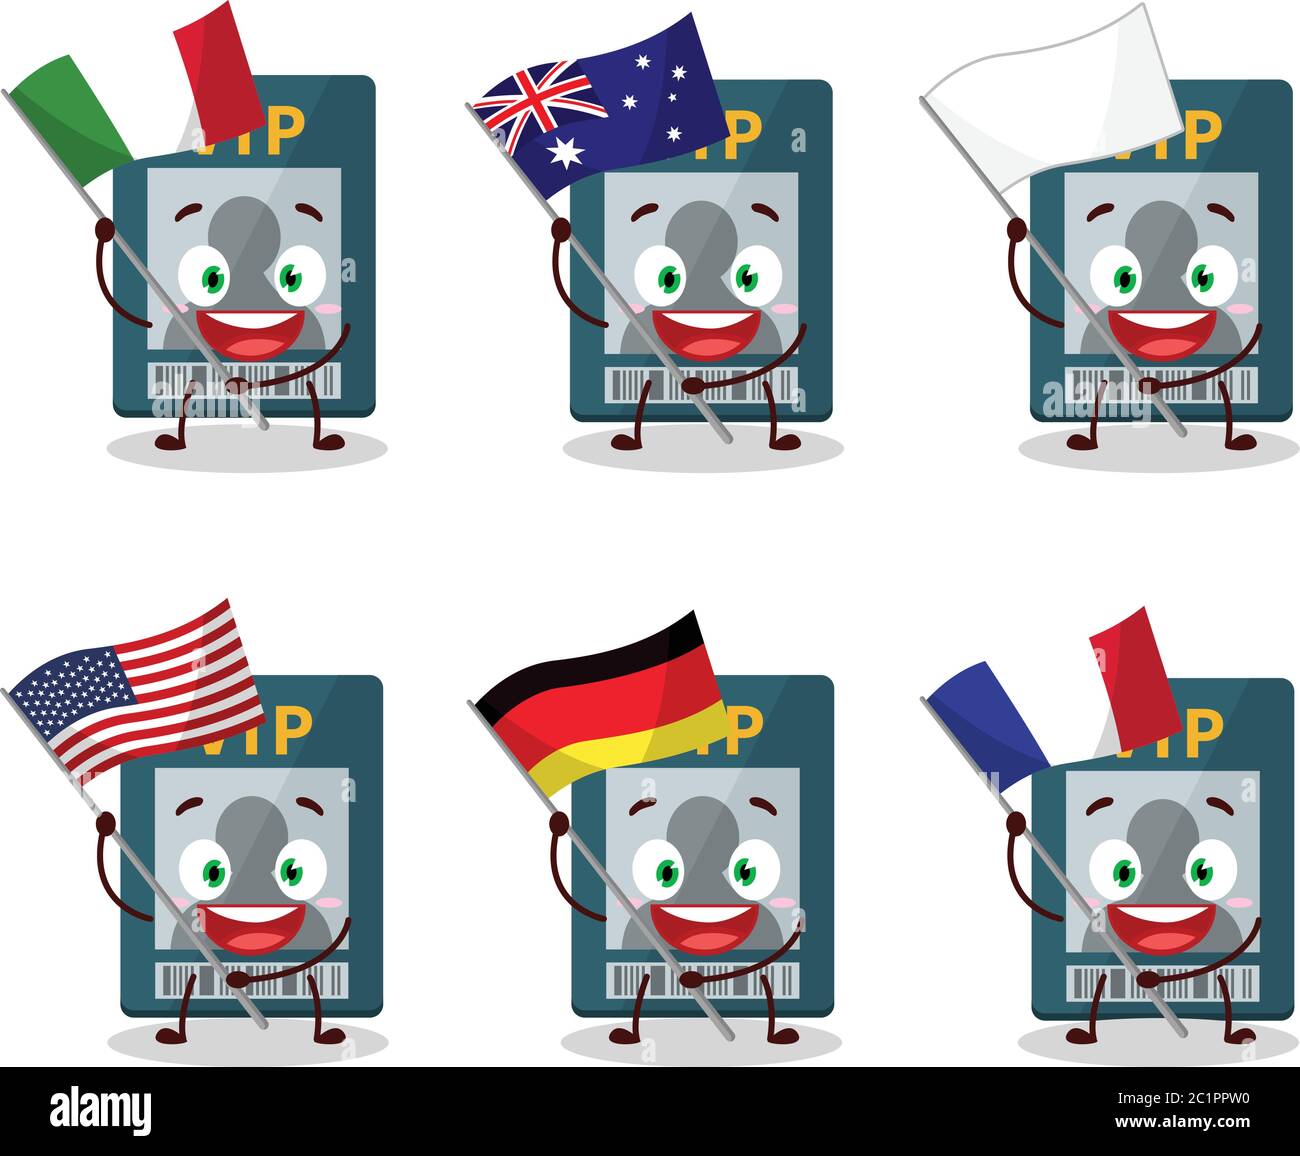 Vip card cartoon character bring the flags of various countries Stock Vector